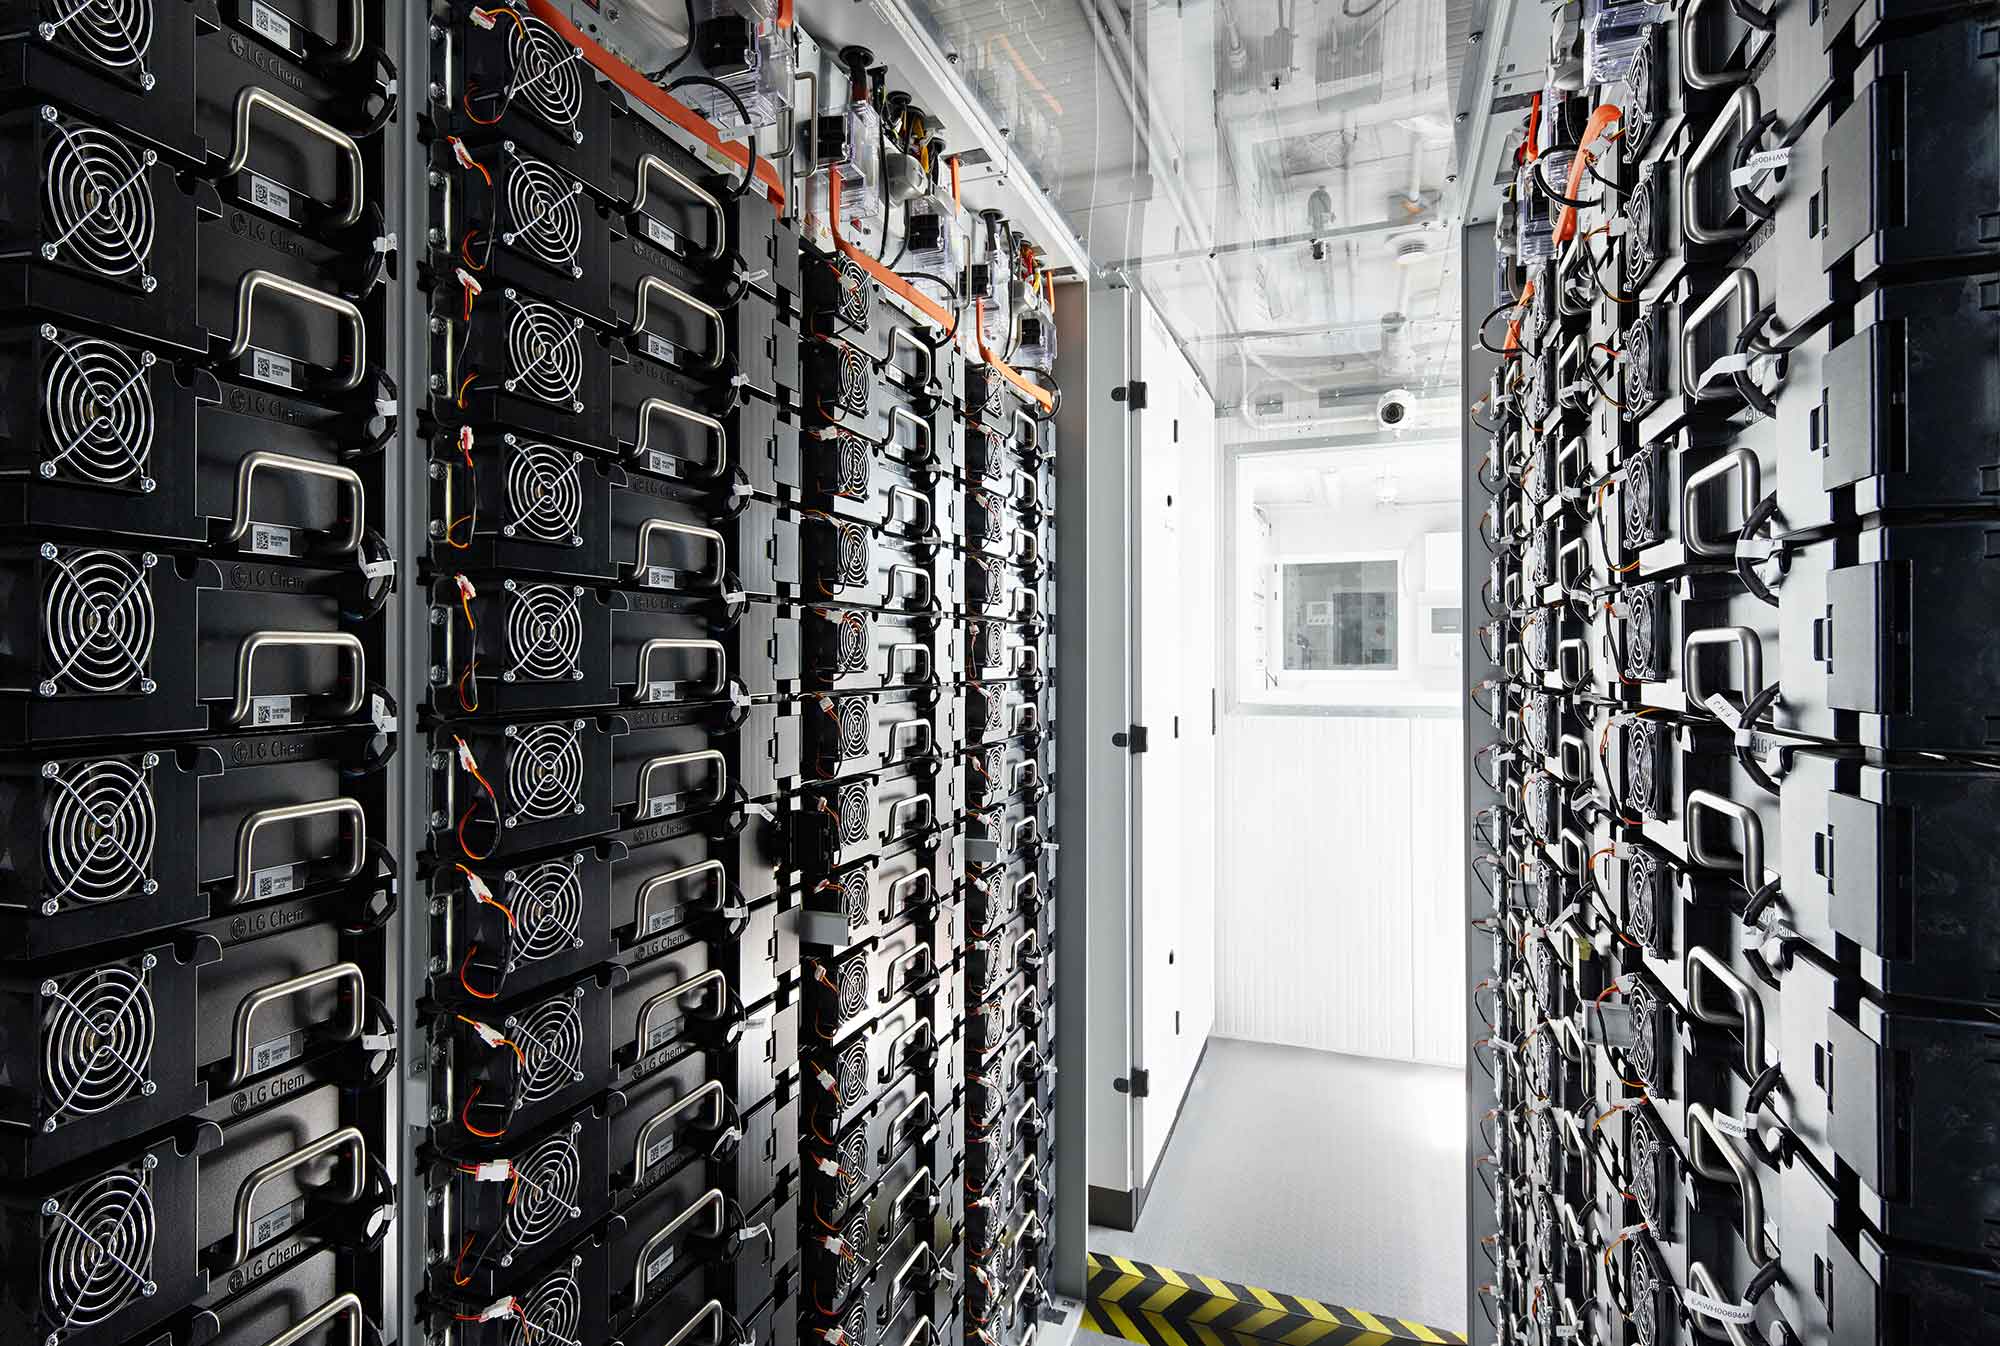 ABS4TSO battery storage unit interior, project “ABS for the power grid”, Photo: APG/Gerhard Wasserbauer